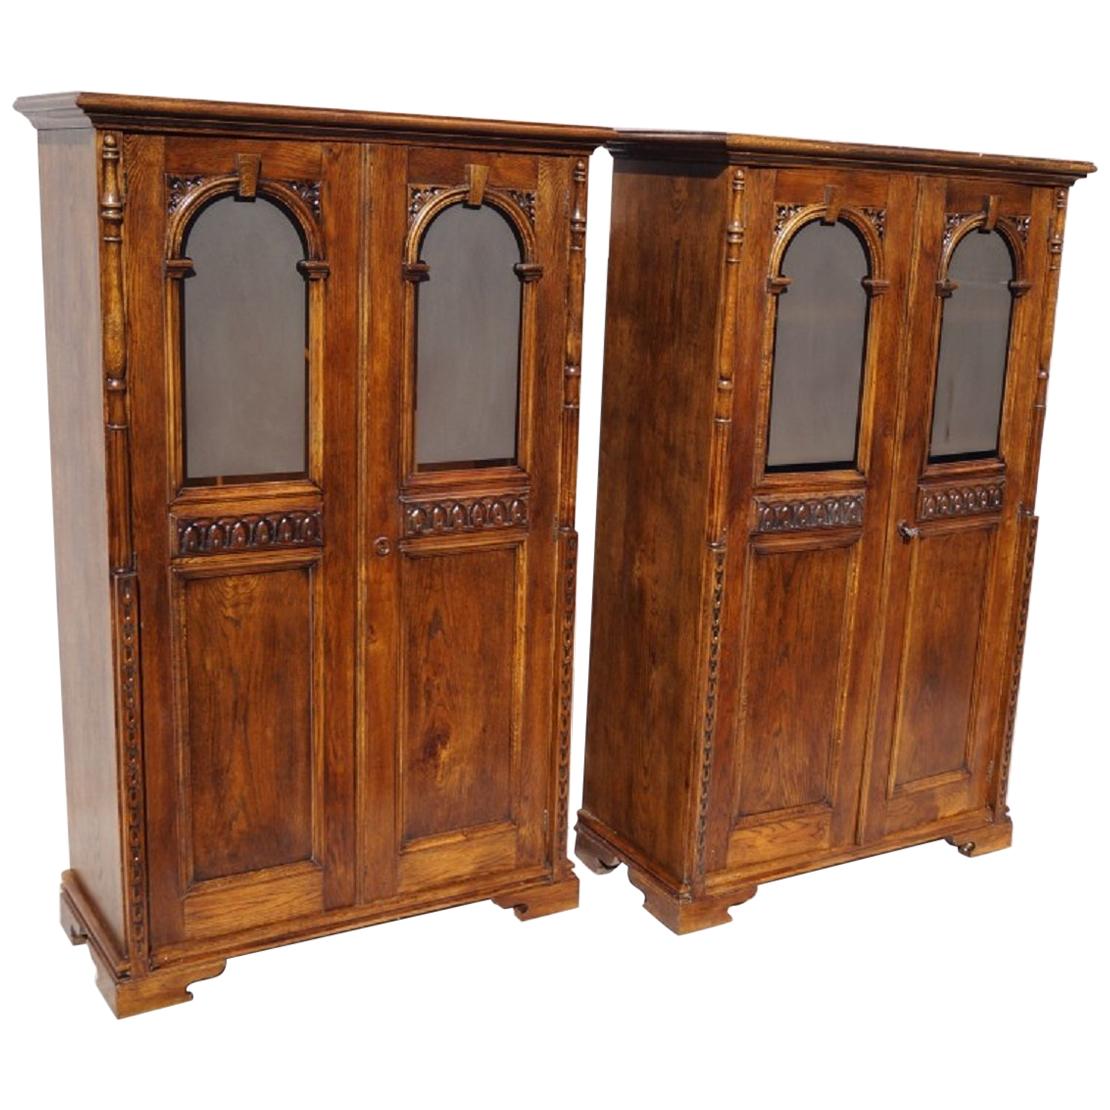 Two Eclectic Twin Bookcases from 1890 For Sale